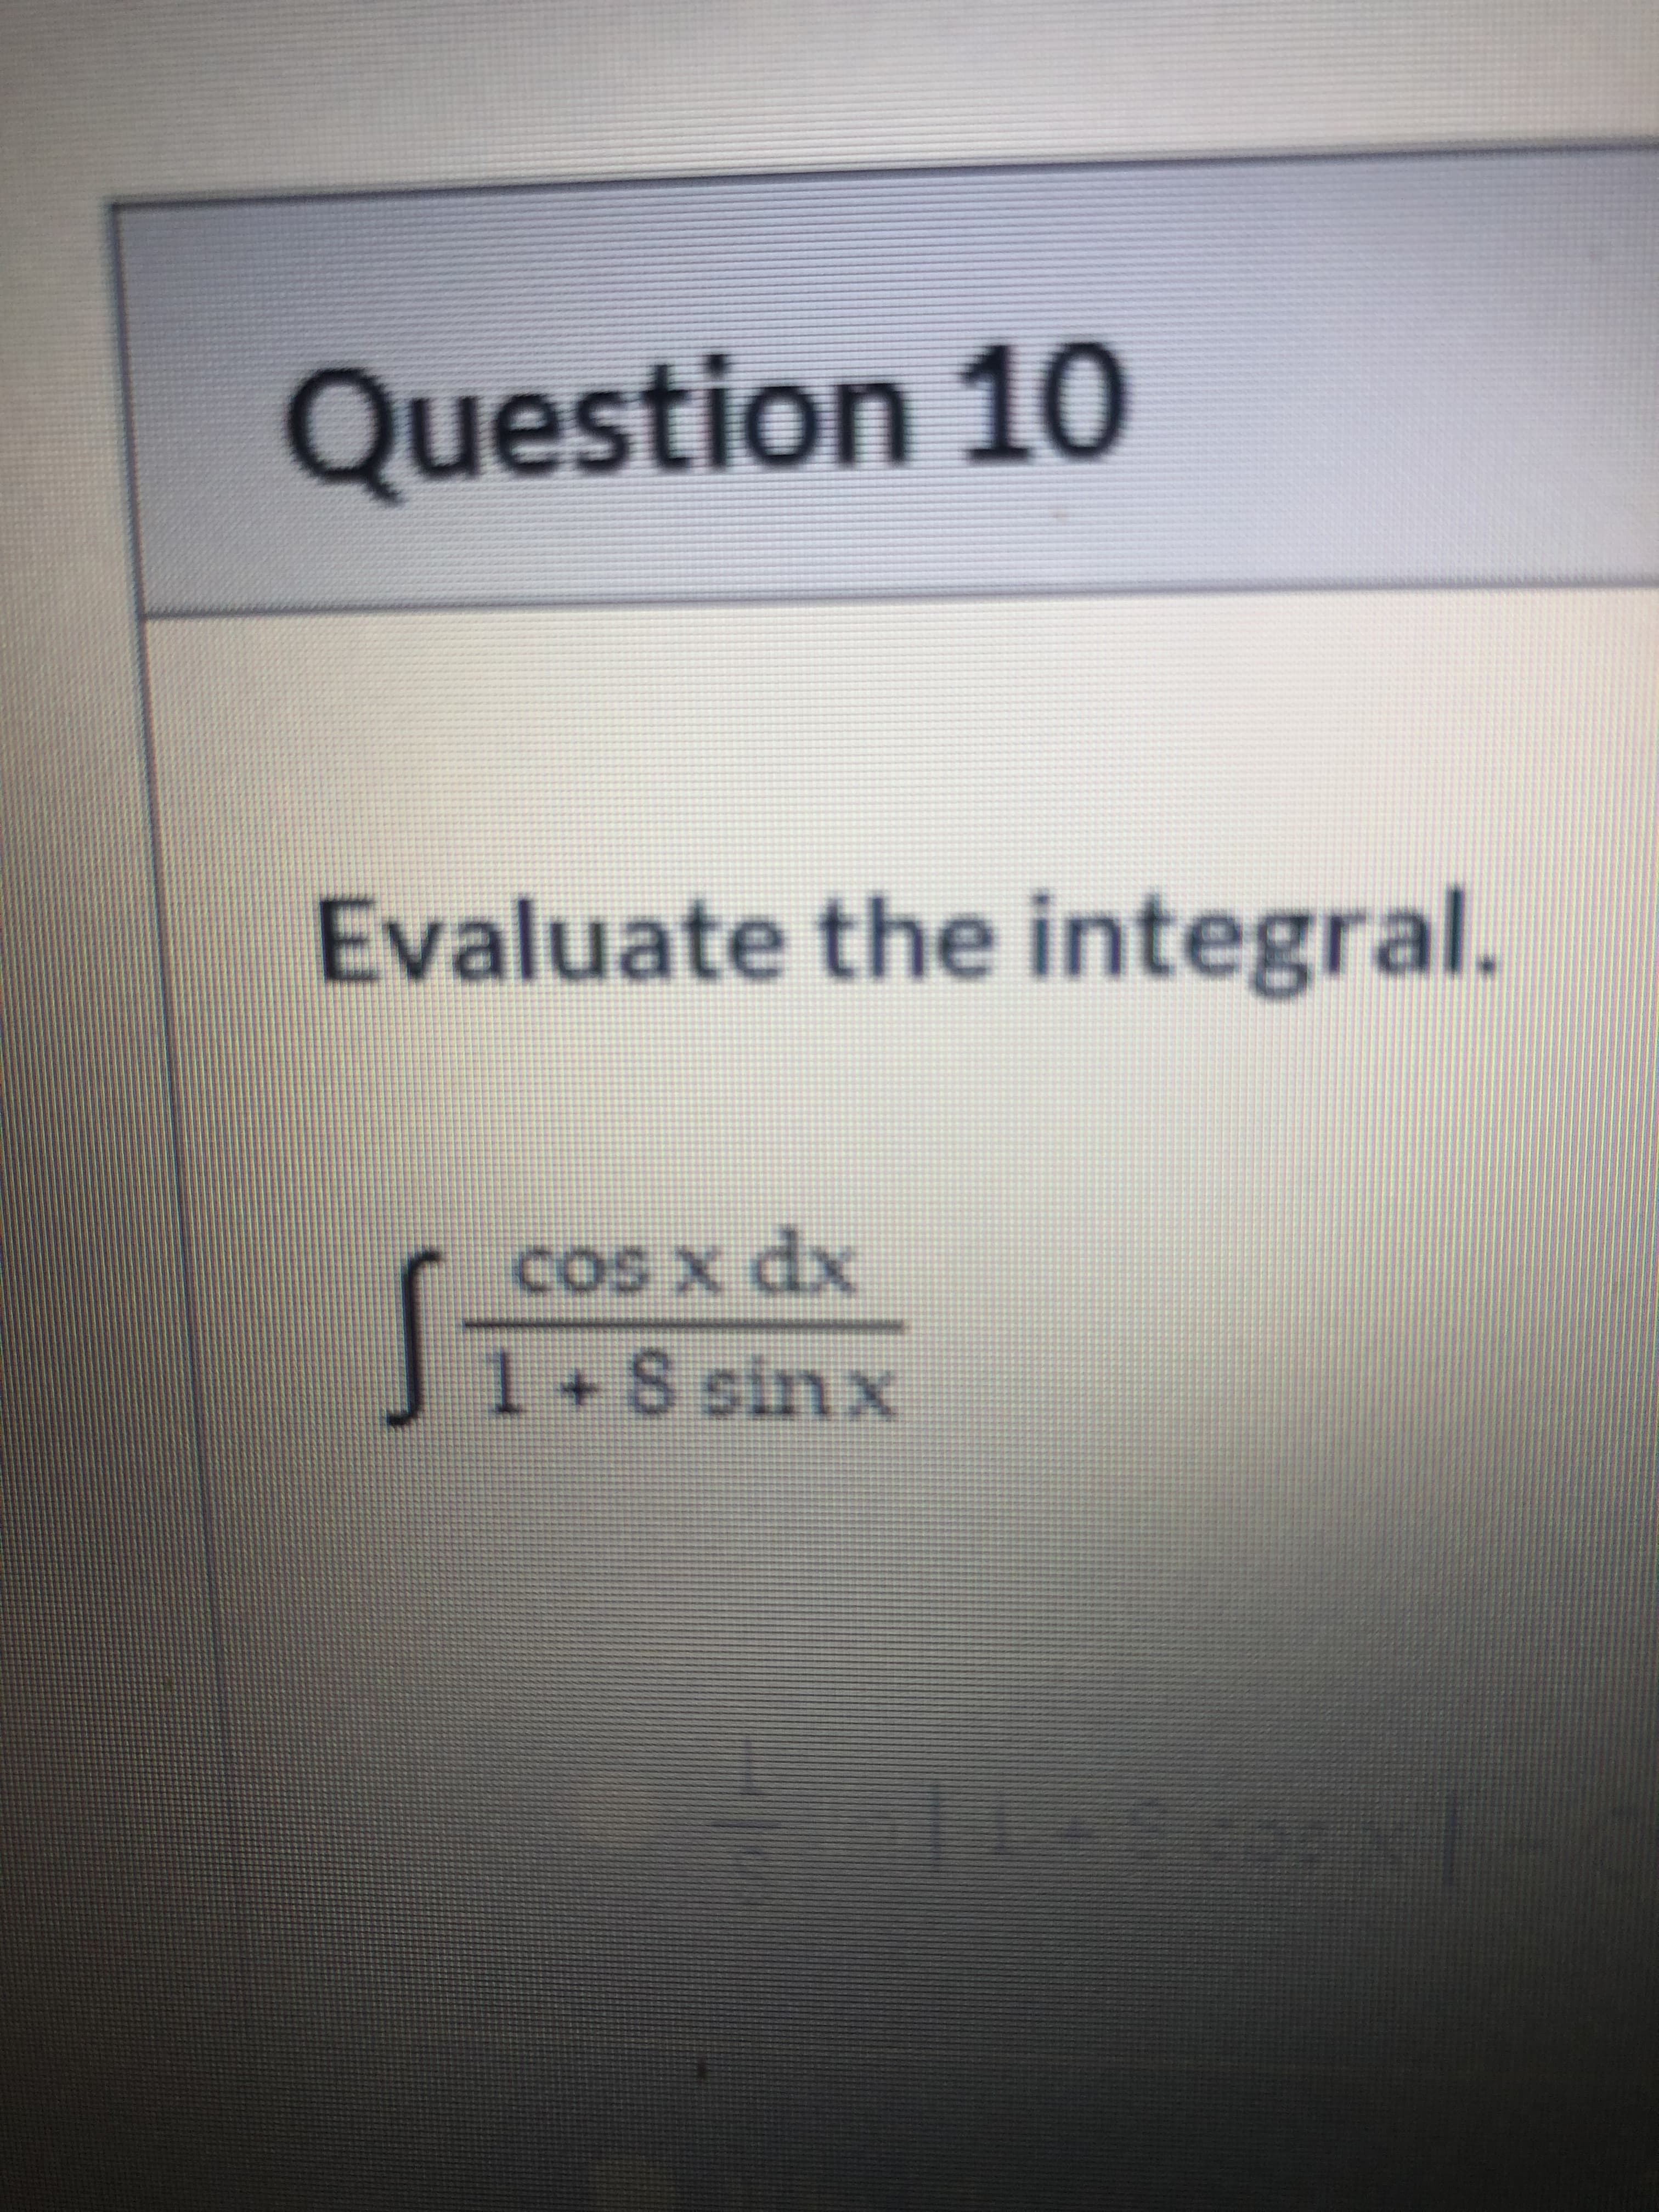 ate the integral.
S sinx
